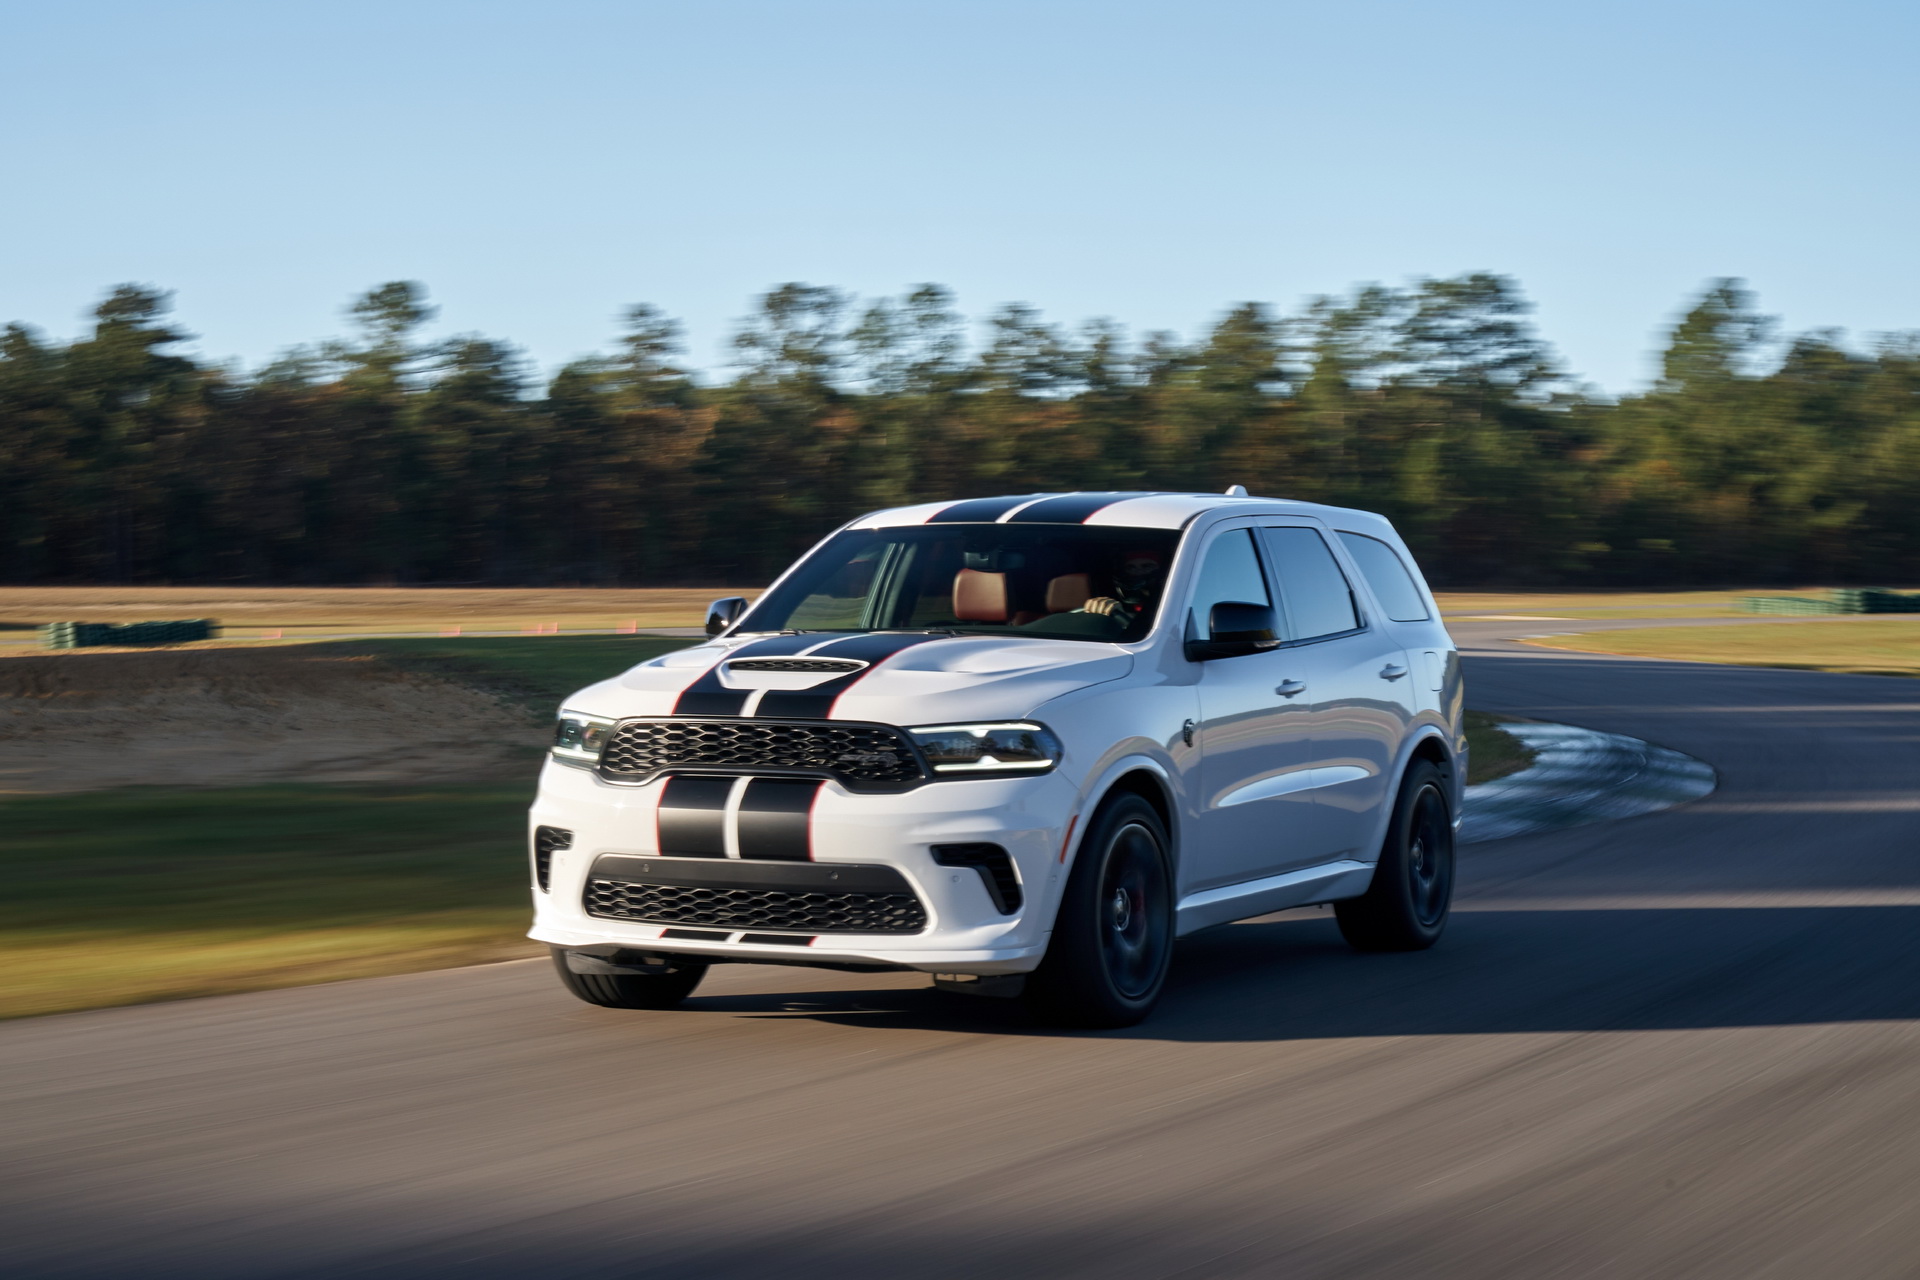 Dodge Durango SRT Hellcat Is Officially Sold Out After Less Than 3